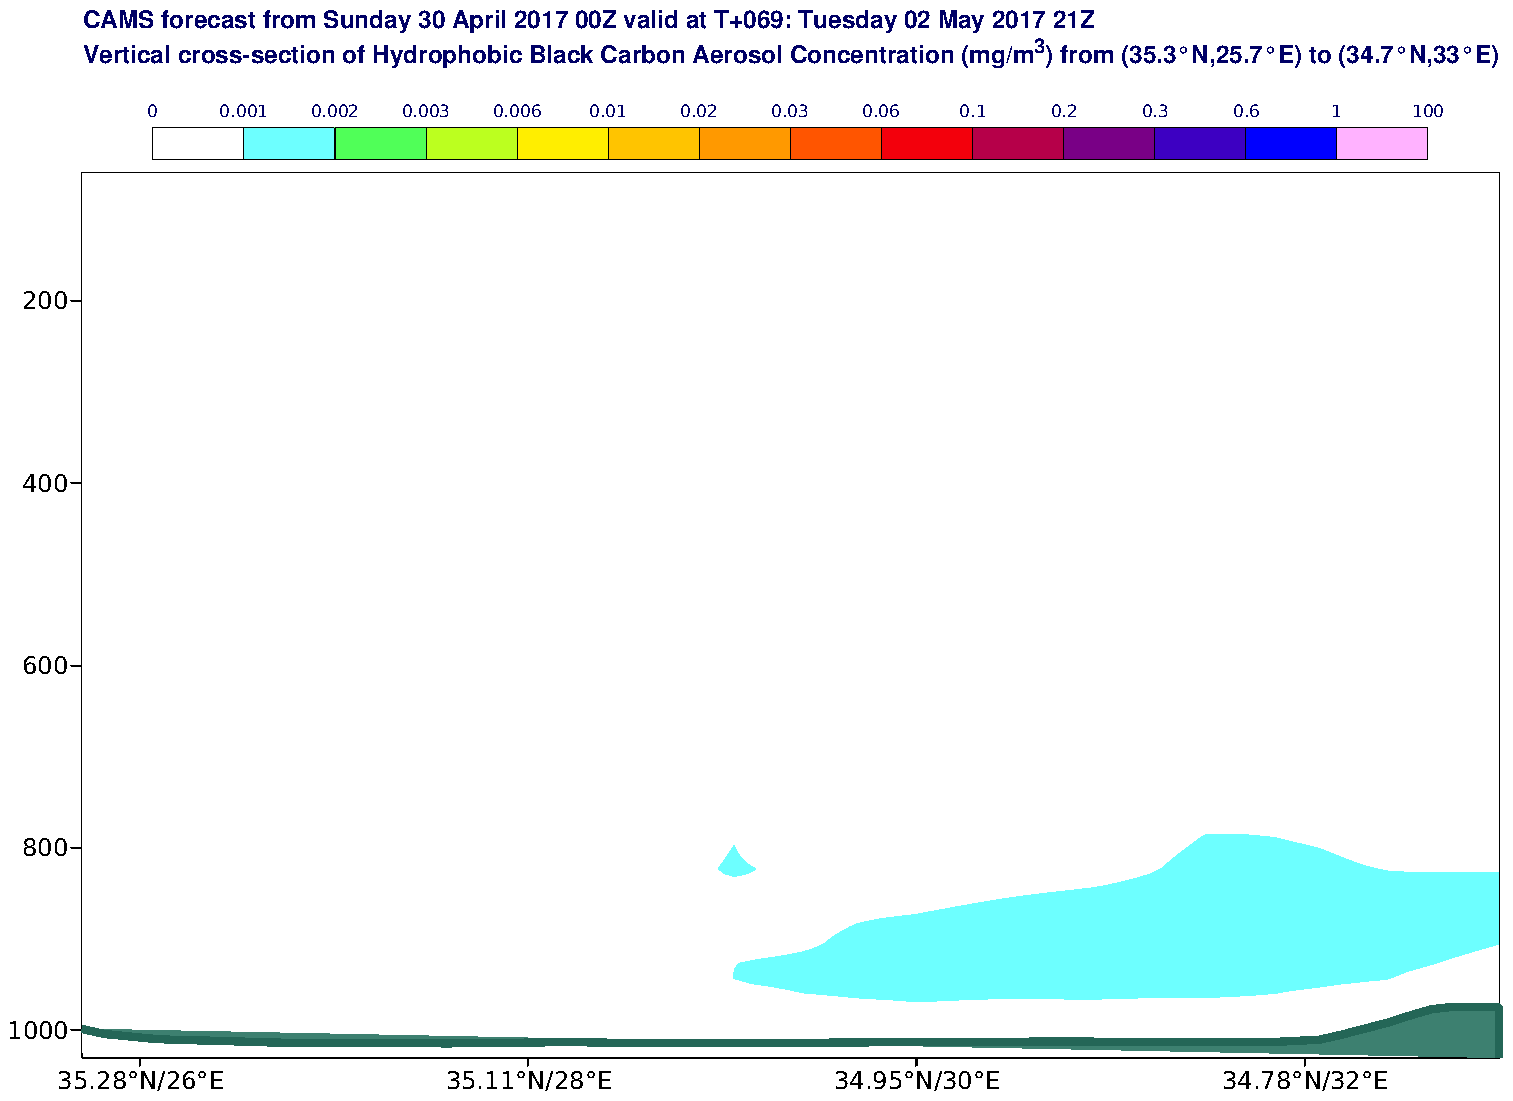 Vertical cross-section of Hydrophobic Black Carbon Aerosol Concentration (mg/m3) valid at T69 - 2017-05-02 21:00